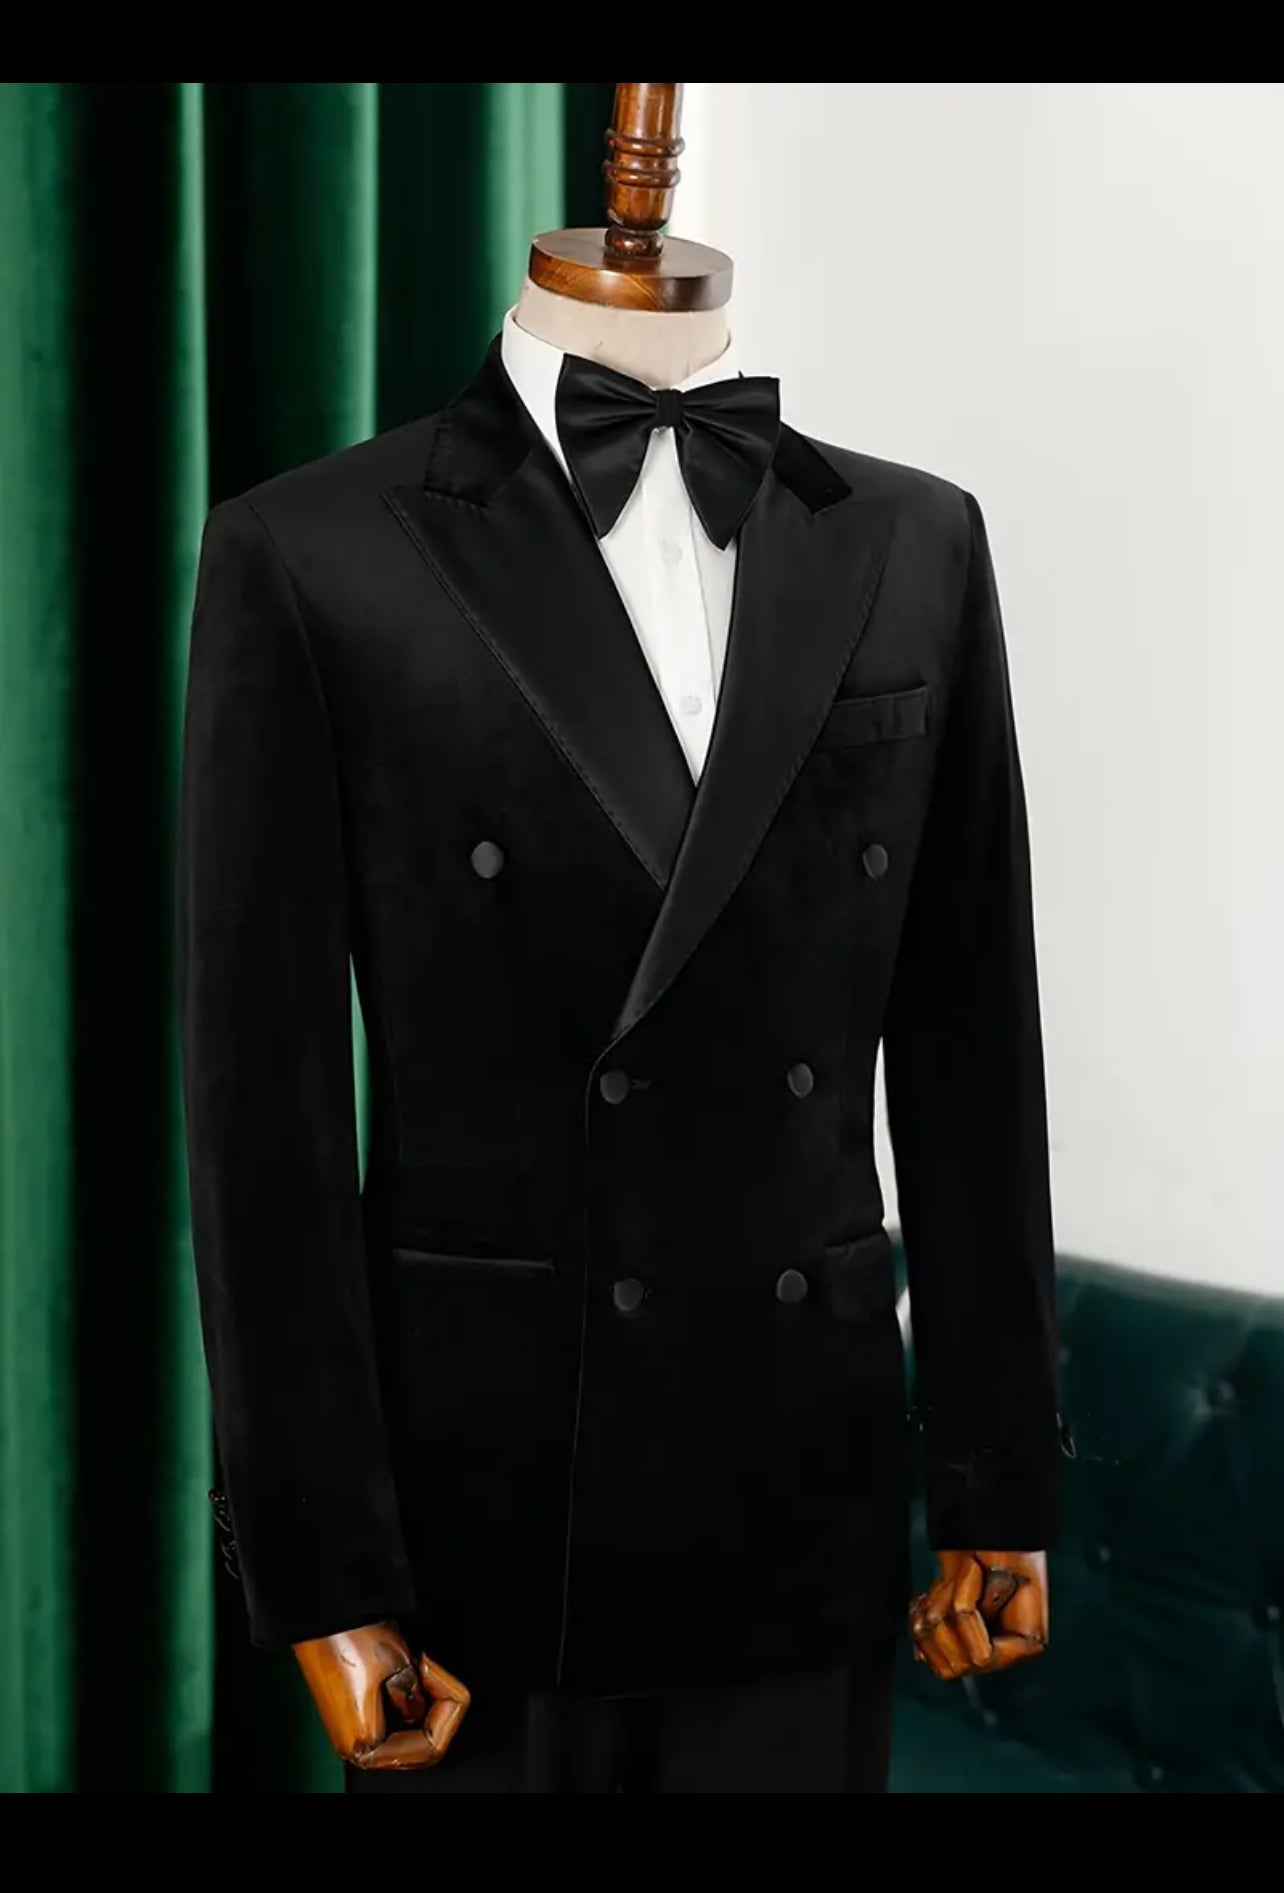 Double Breasted Flap Pocket Suit Jacket, Men's Formal Dinner Jacket, Sugar 🎩 Daddy Collection